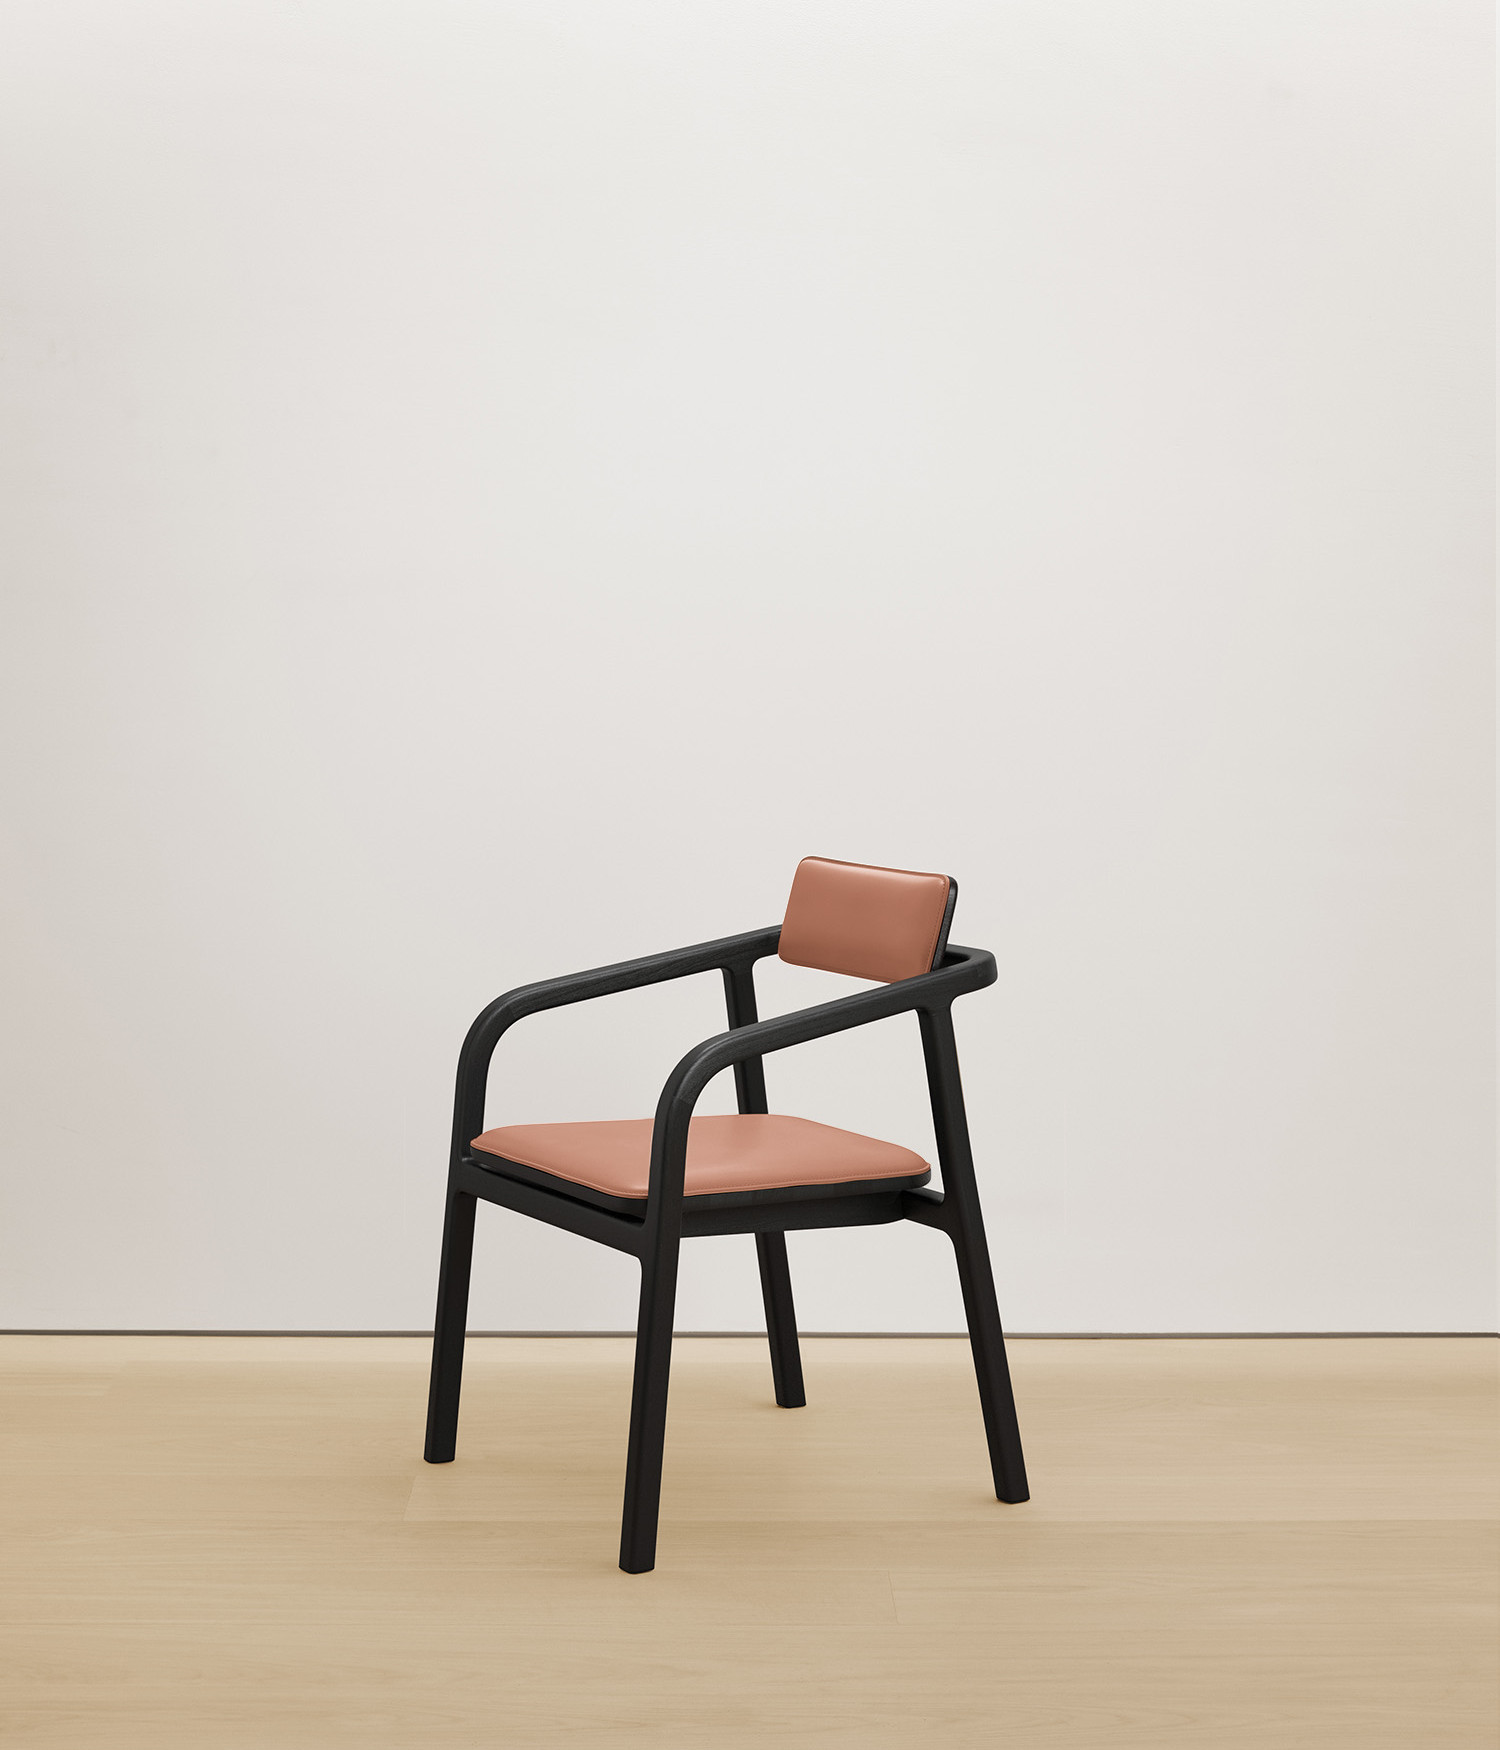  black-stained-oak chair with  color upholstered seat